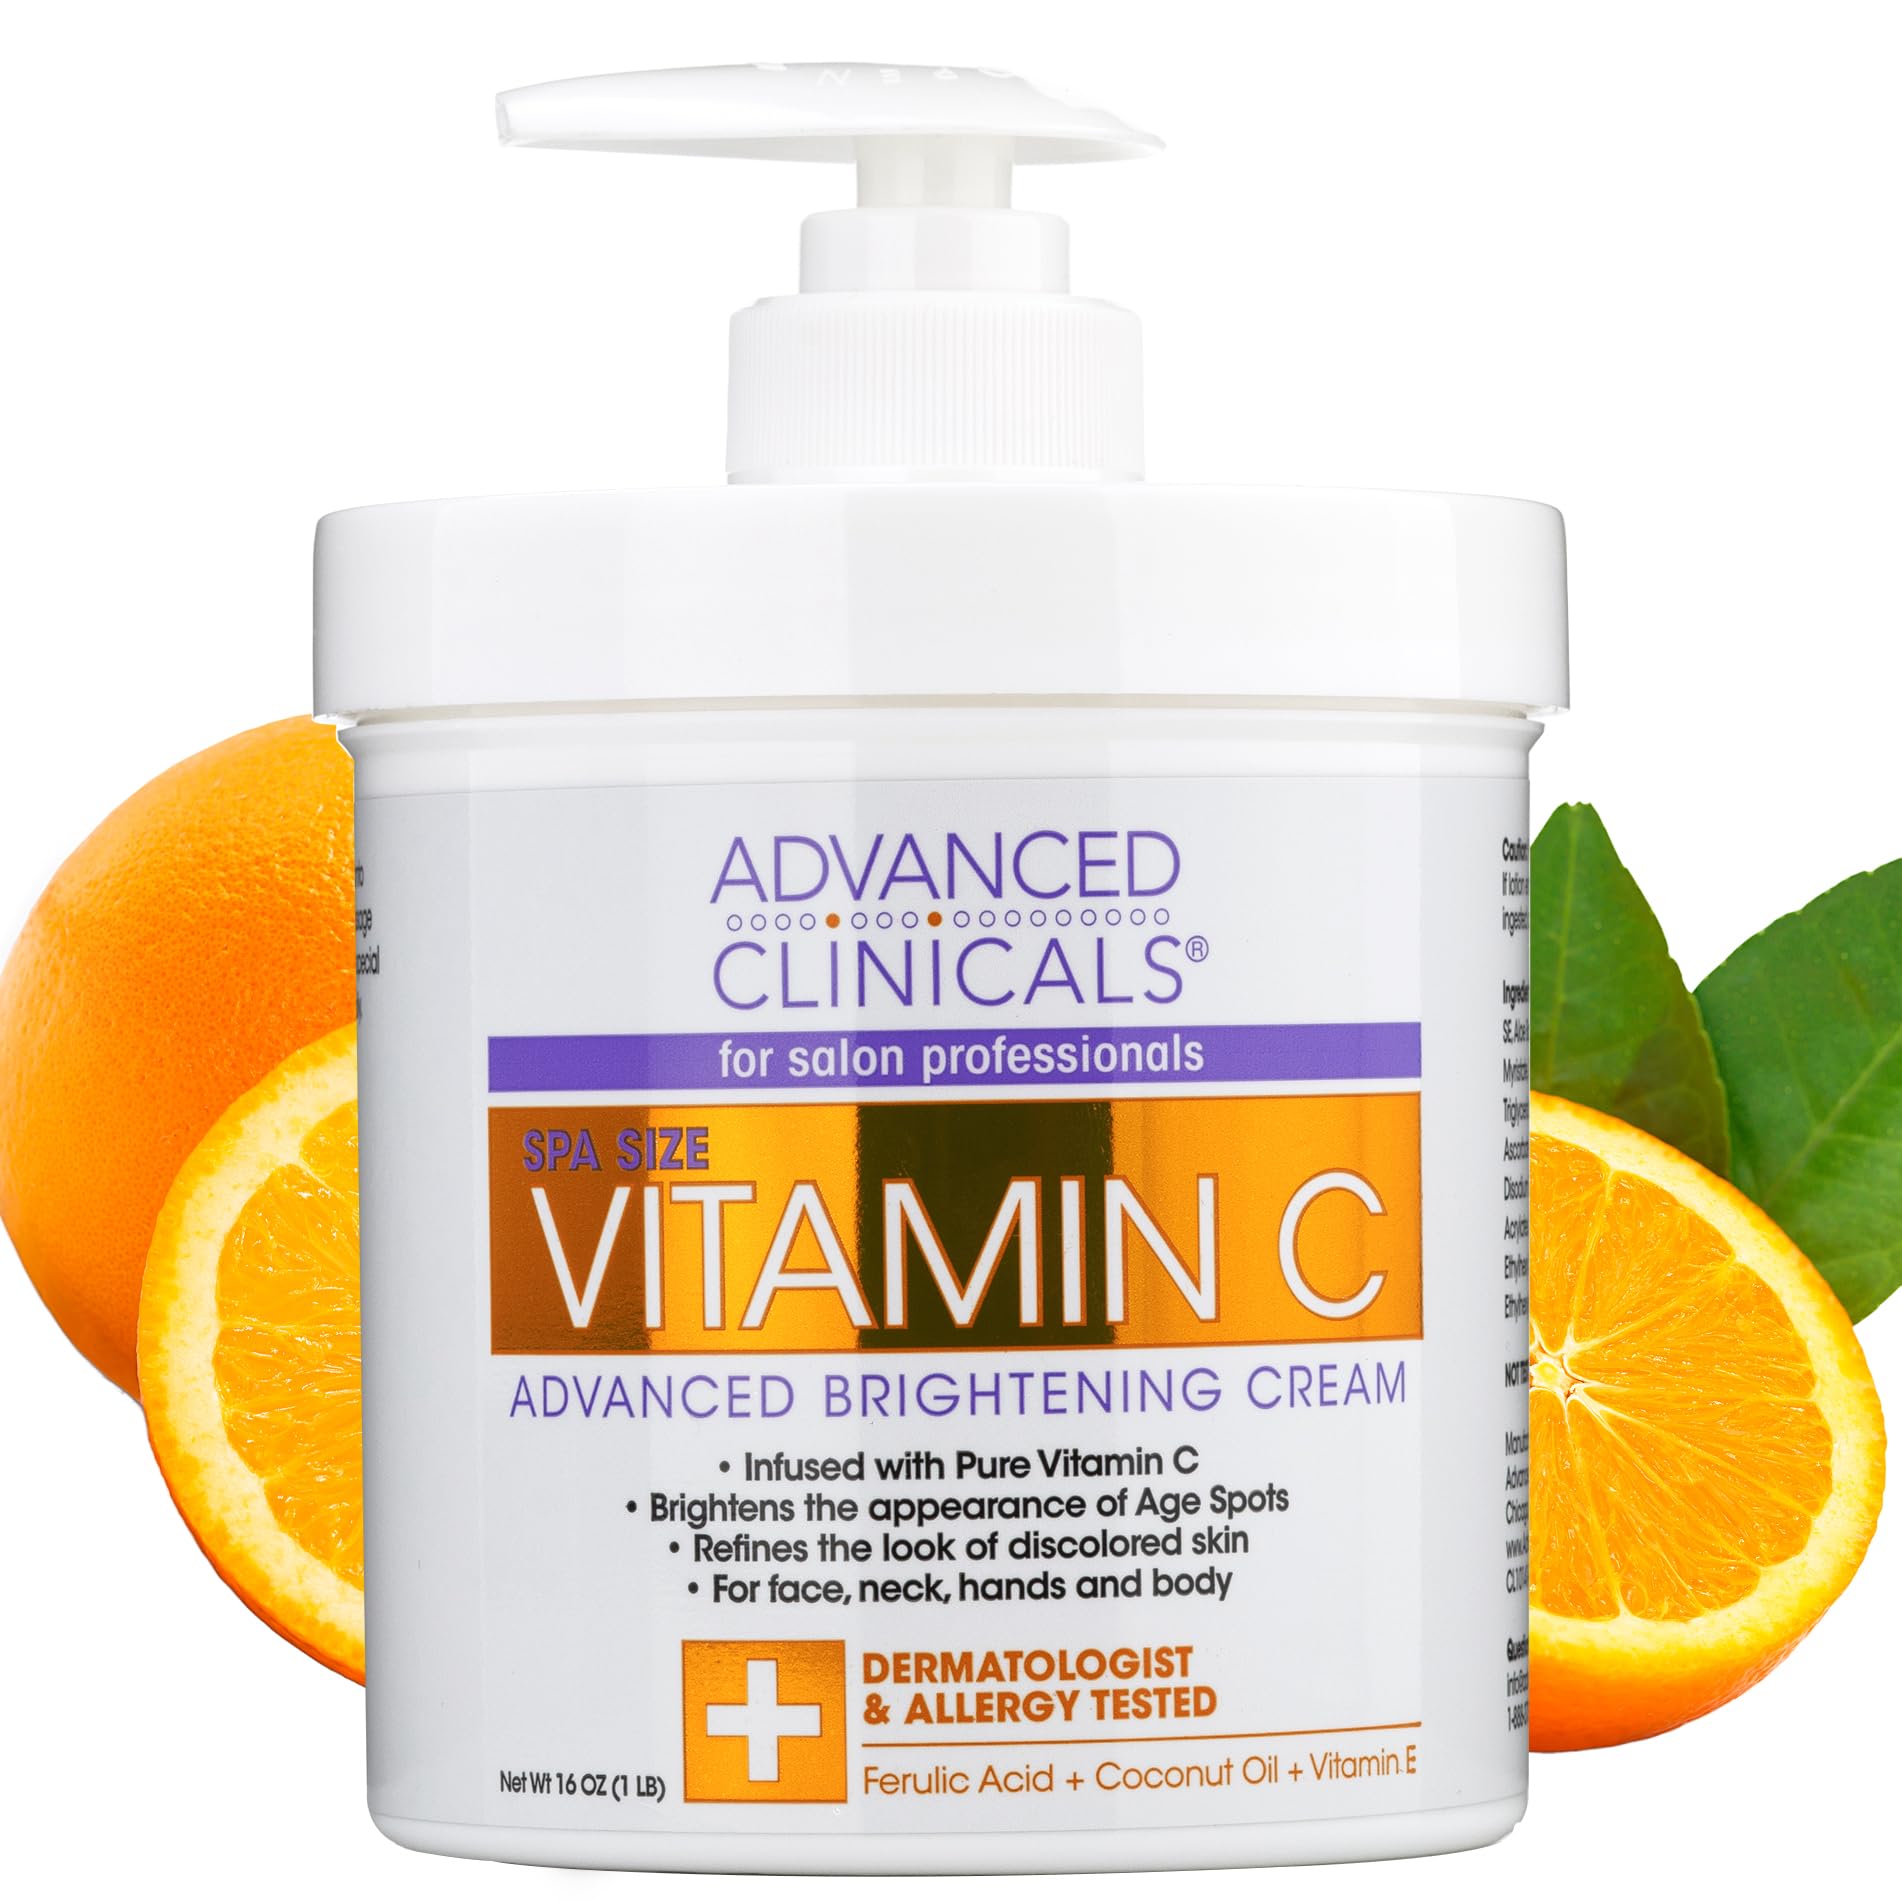 Advanced Clinicals Vitamin C Cream Face Lotion & Body Lotion Moisturizer | Anti Aging Skin Care Firming & Brightening Cream For Body, Face, Uneven Skin Tone, Wrinkles, & Sun Damaged Dry Skin, 16 Oz